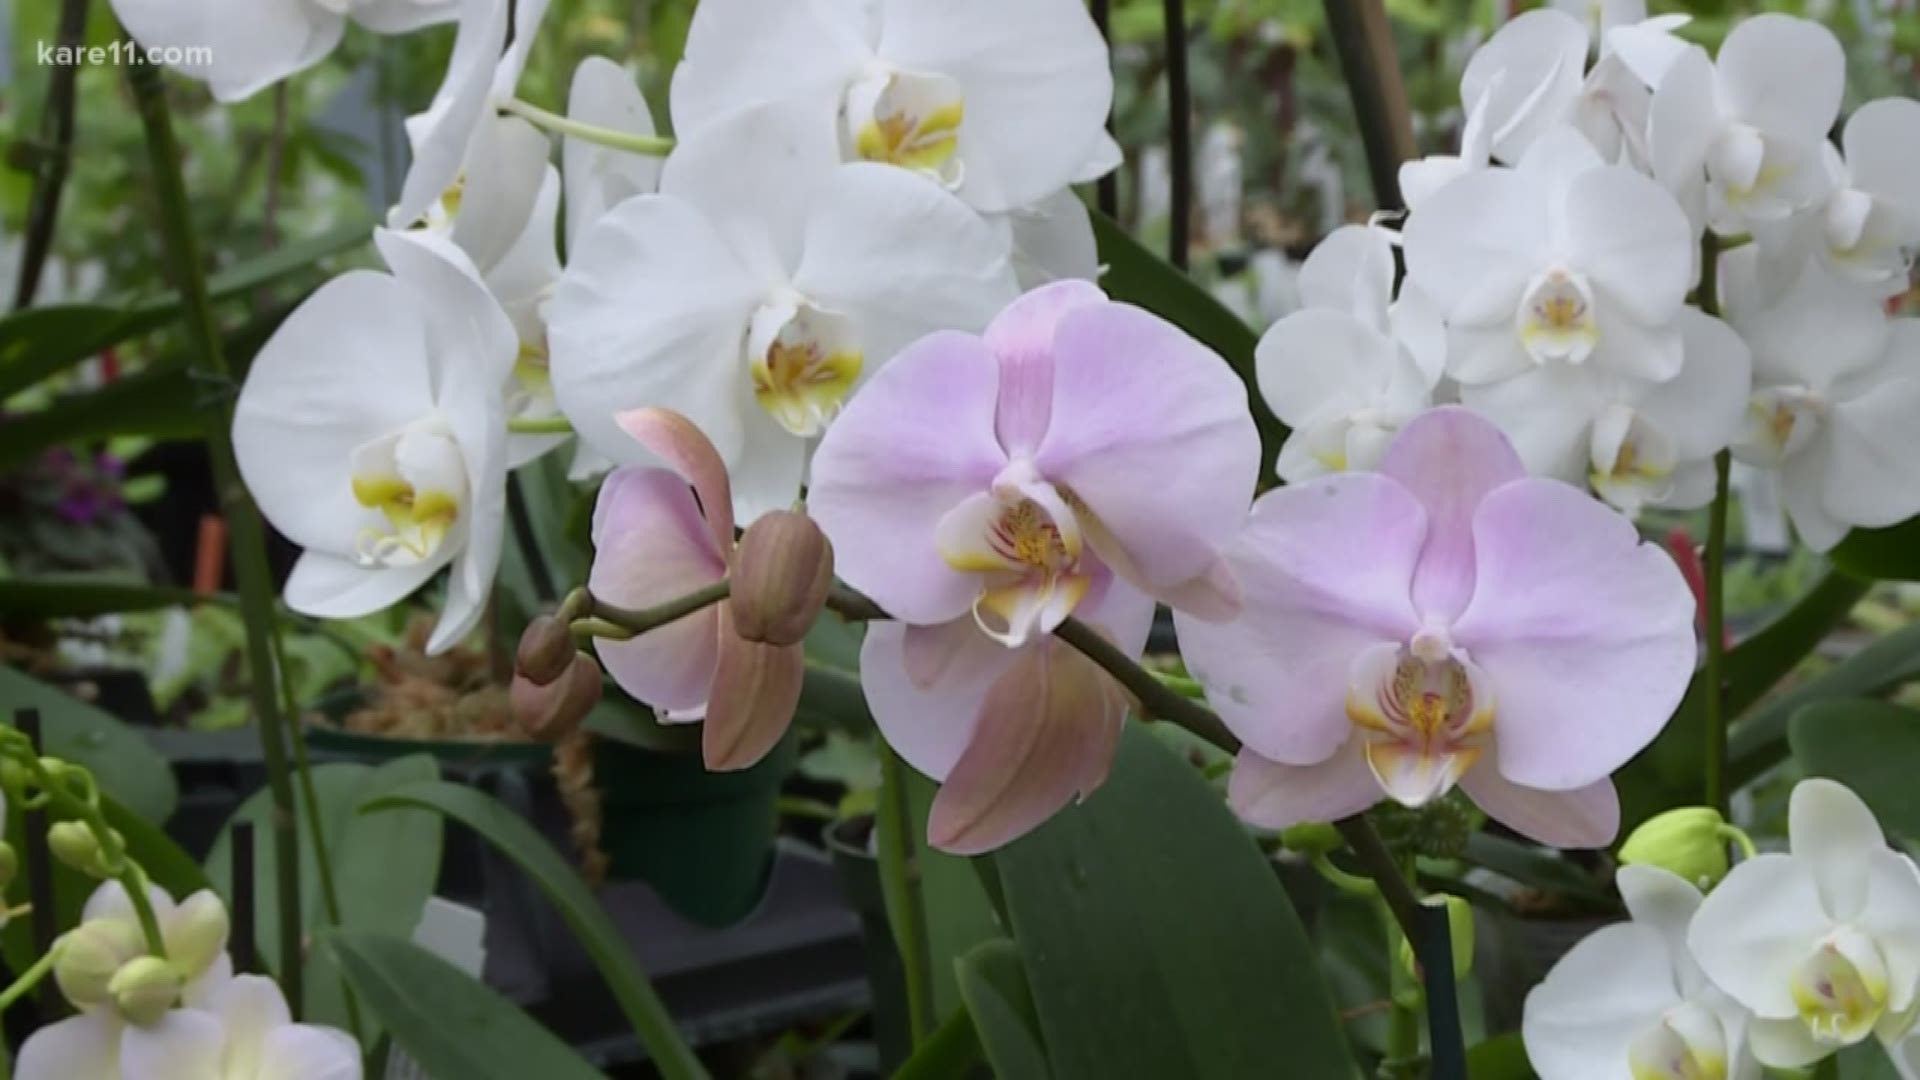 Jason Fischer of Orchids Limited in Plymouth is recognized worldwide all because of one specific species. Plus he knows a thing or two about taking care of orchids.